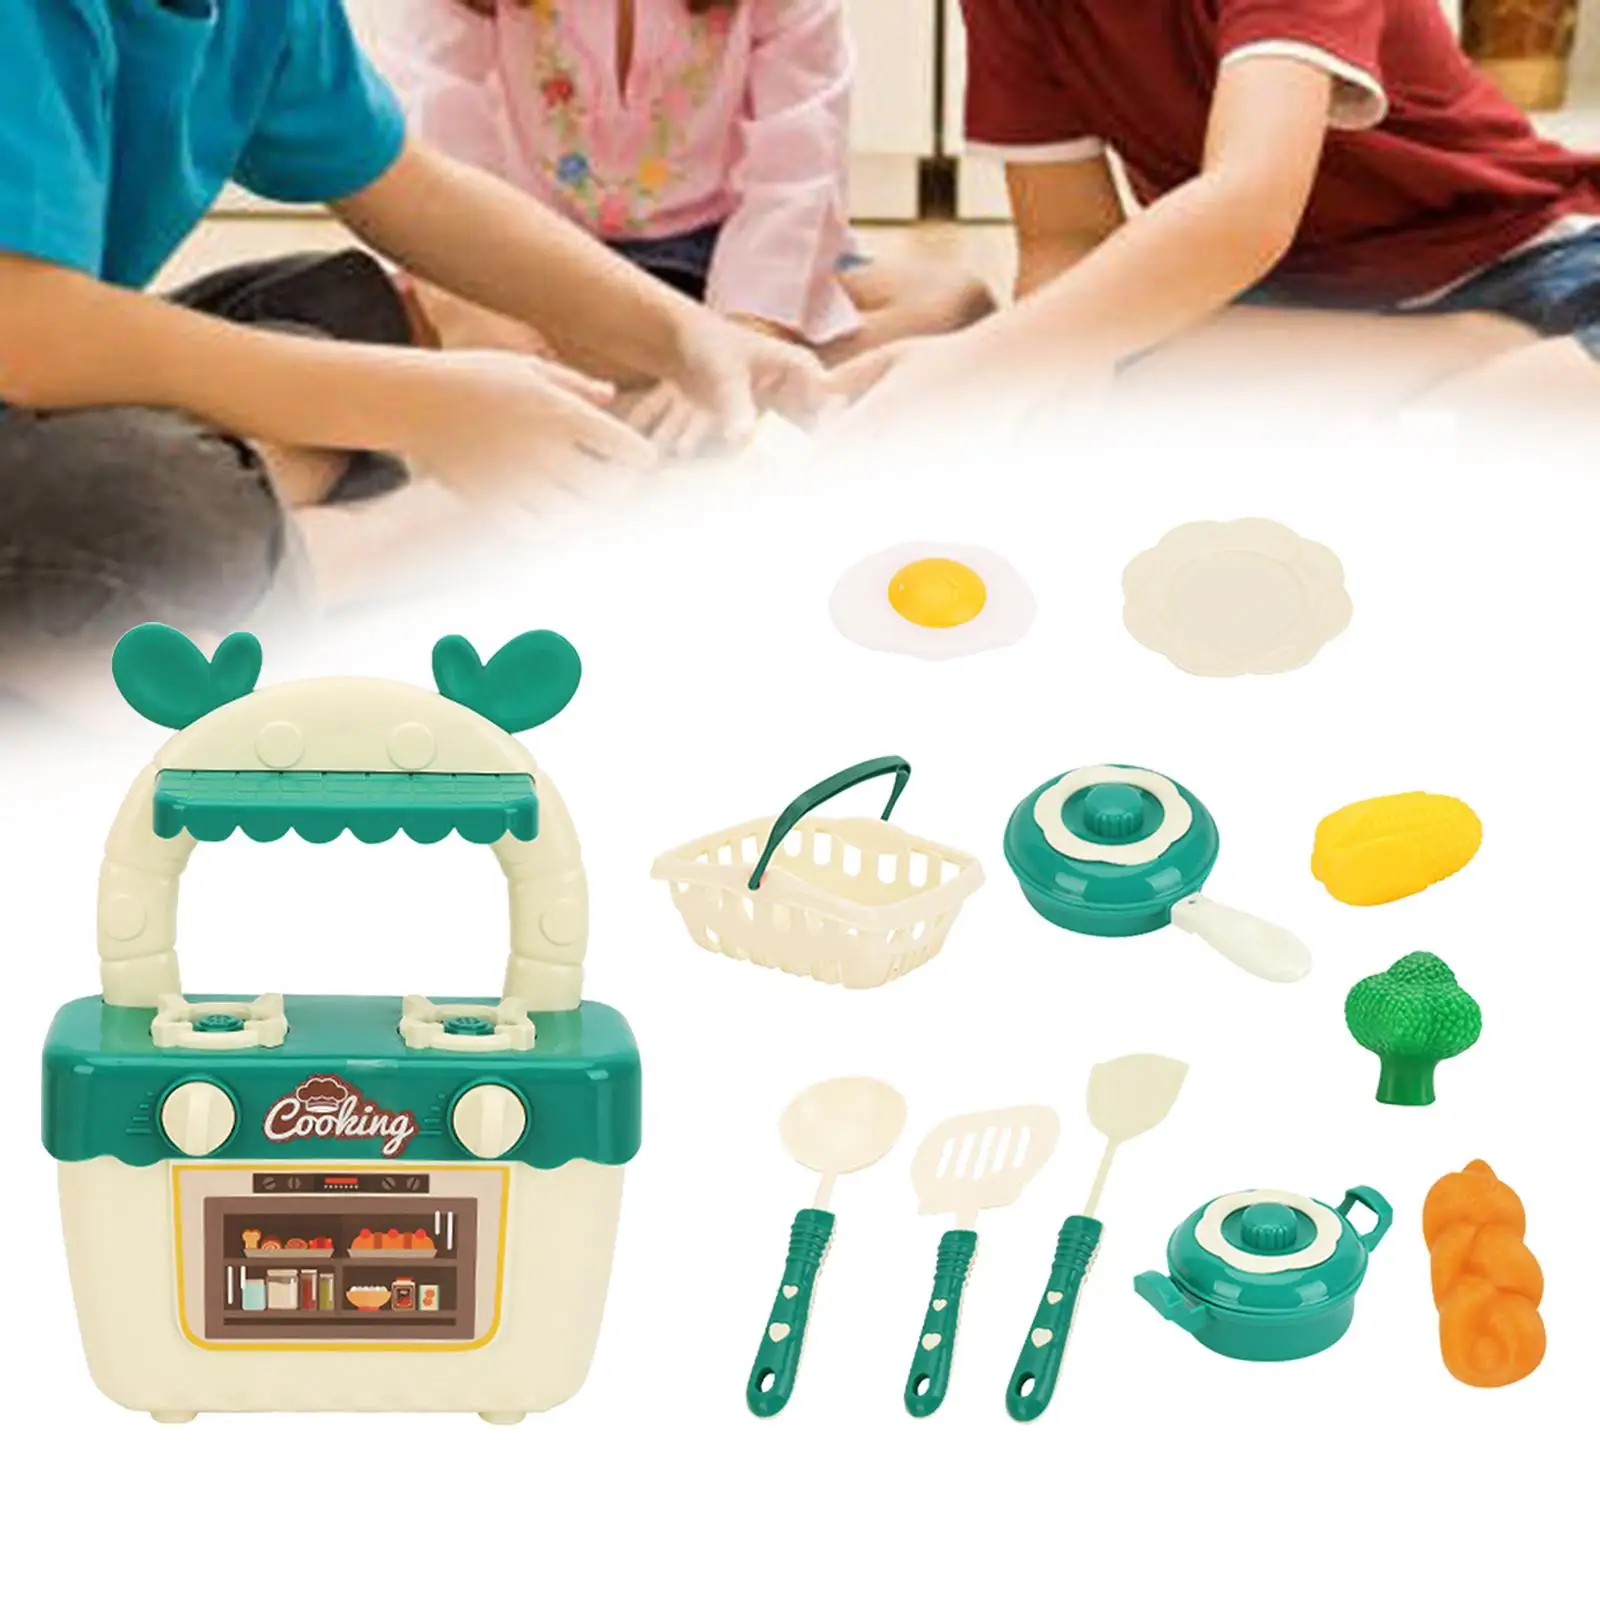 Cooking Toy Set Toys Accessories Colorful Realistic Christmas Birthday Gifts for Kids Girls Boys